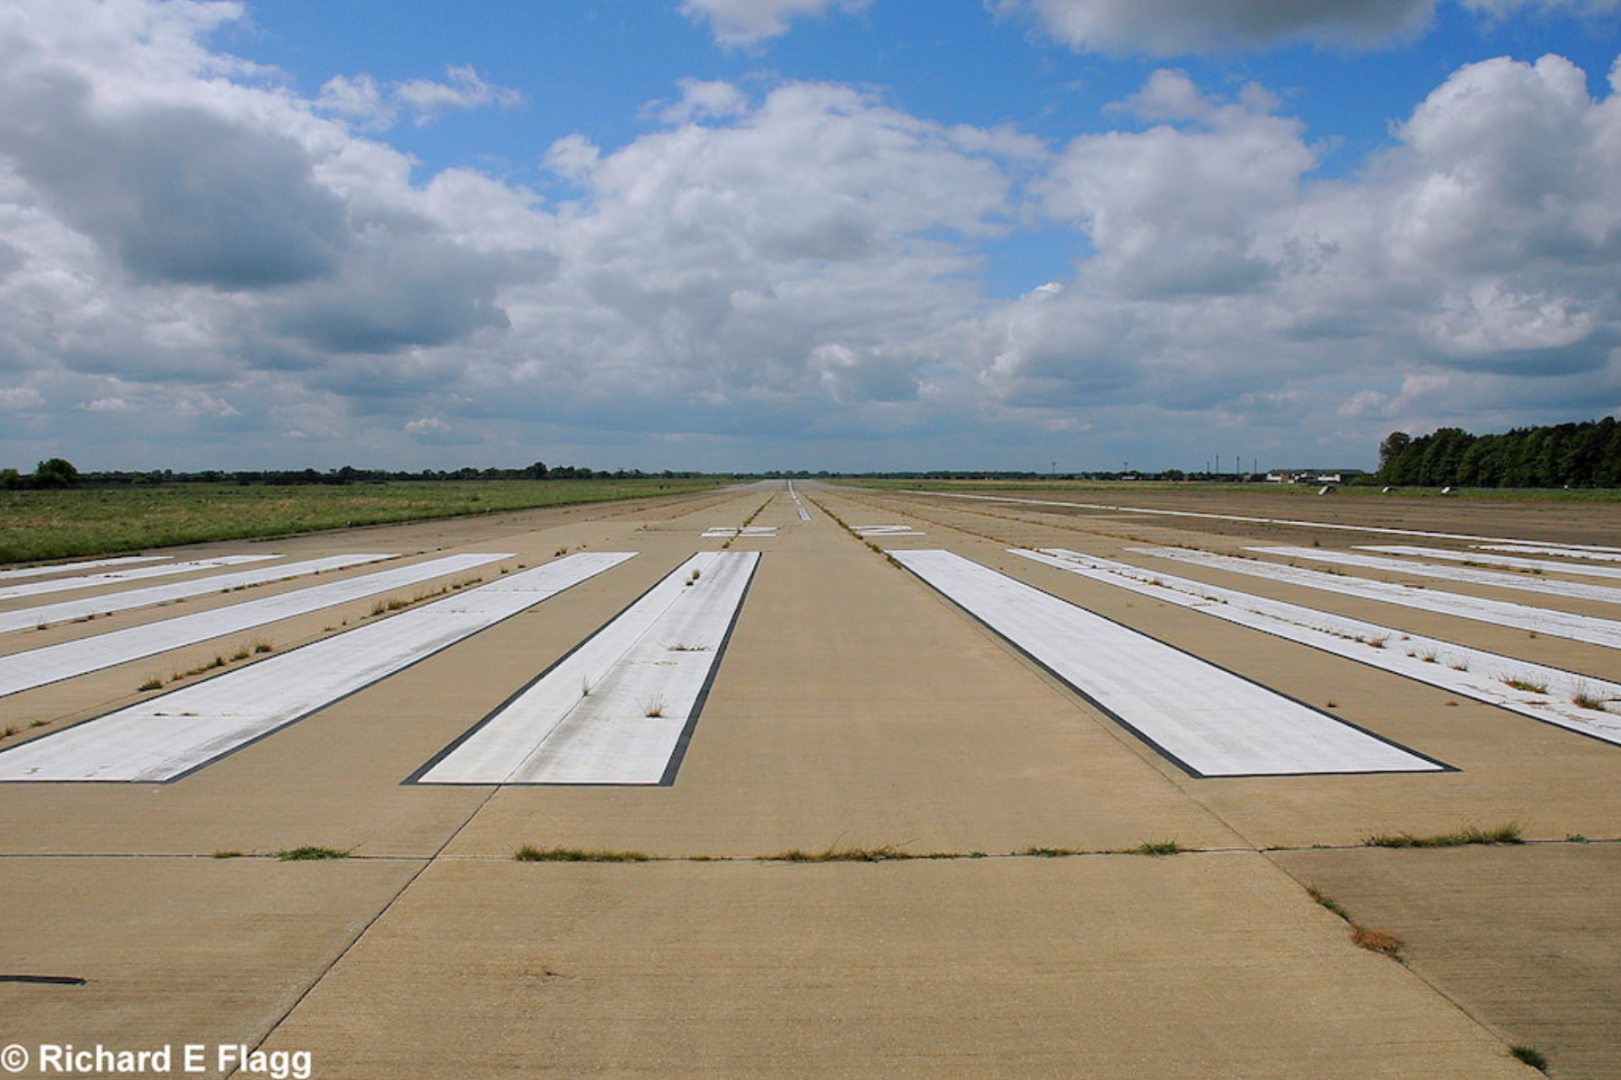 009Runway 04:22. Looking south west from the runway 22 threshold - 18 May 2008.png